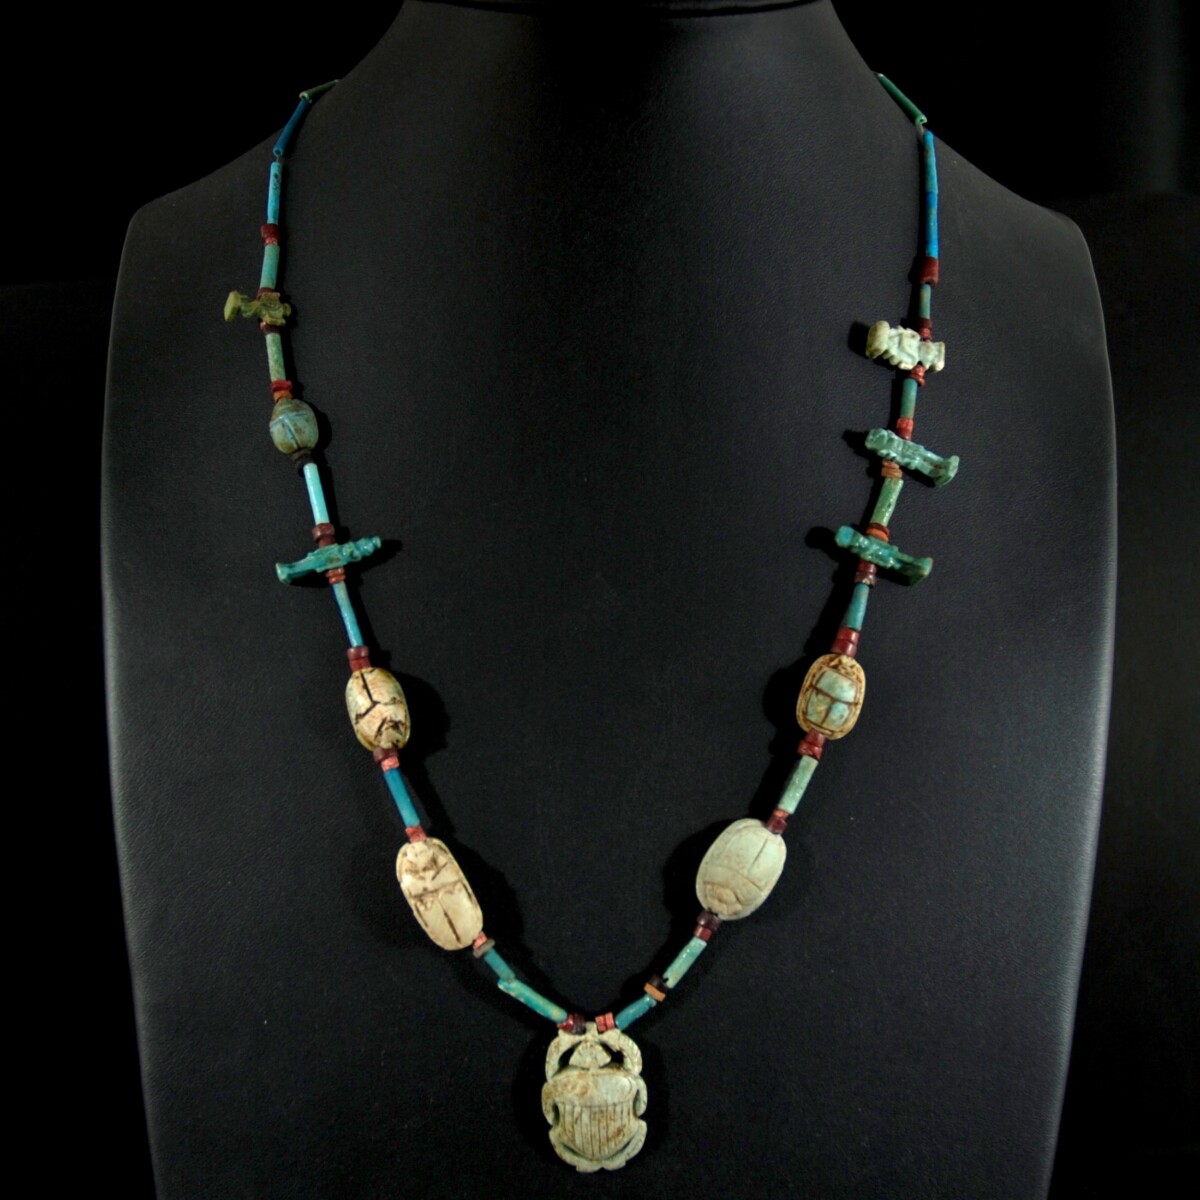 Egyptian necklace with scarabs